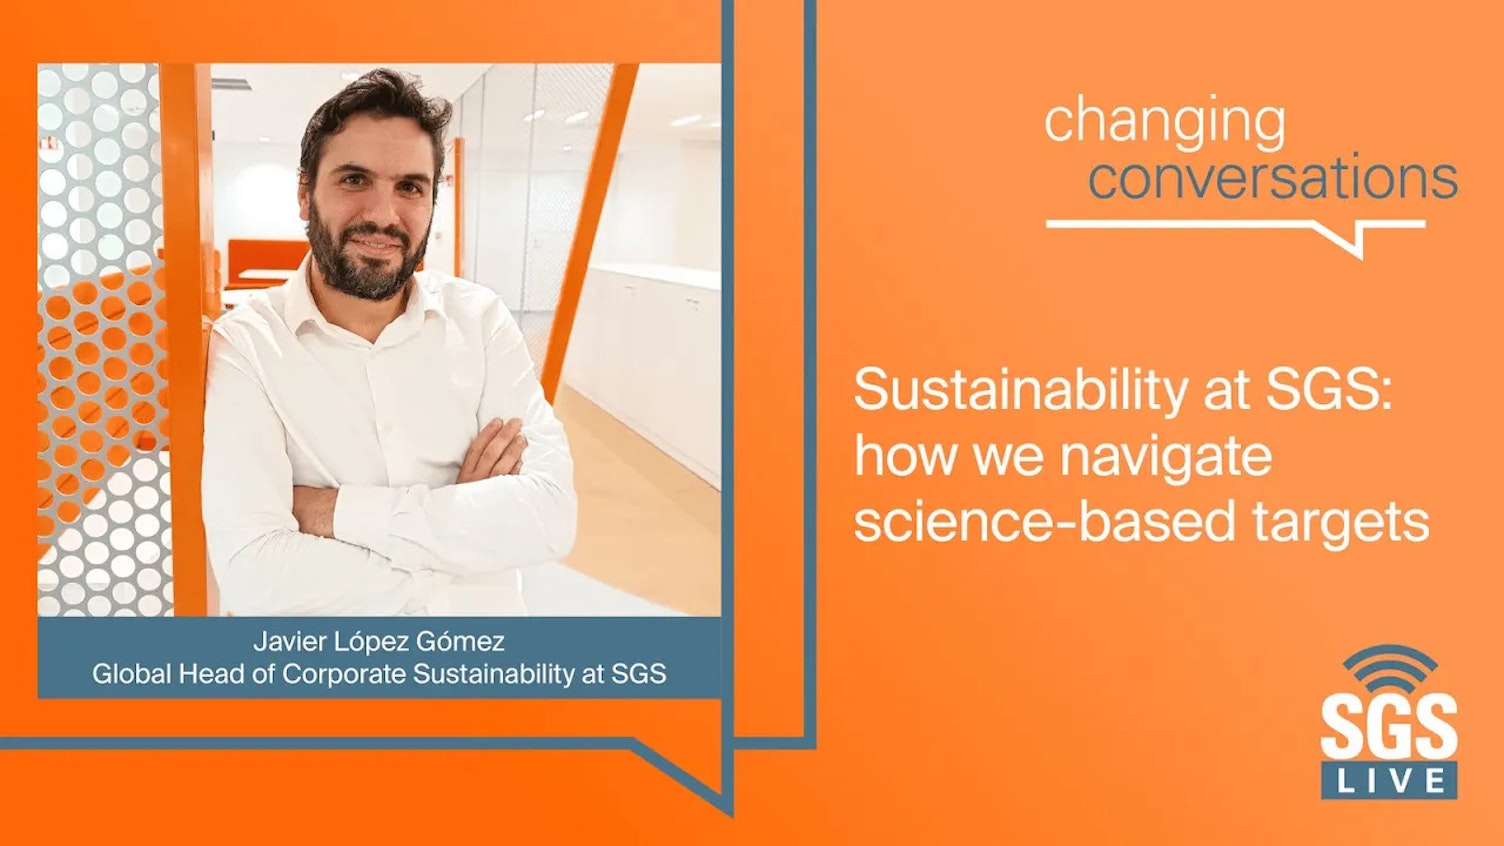 SGS live presents: Sustainability at SGS - how we navigate science-based targets